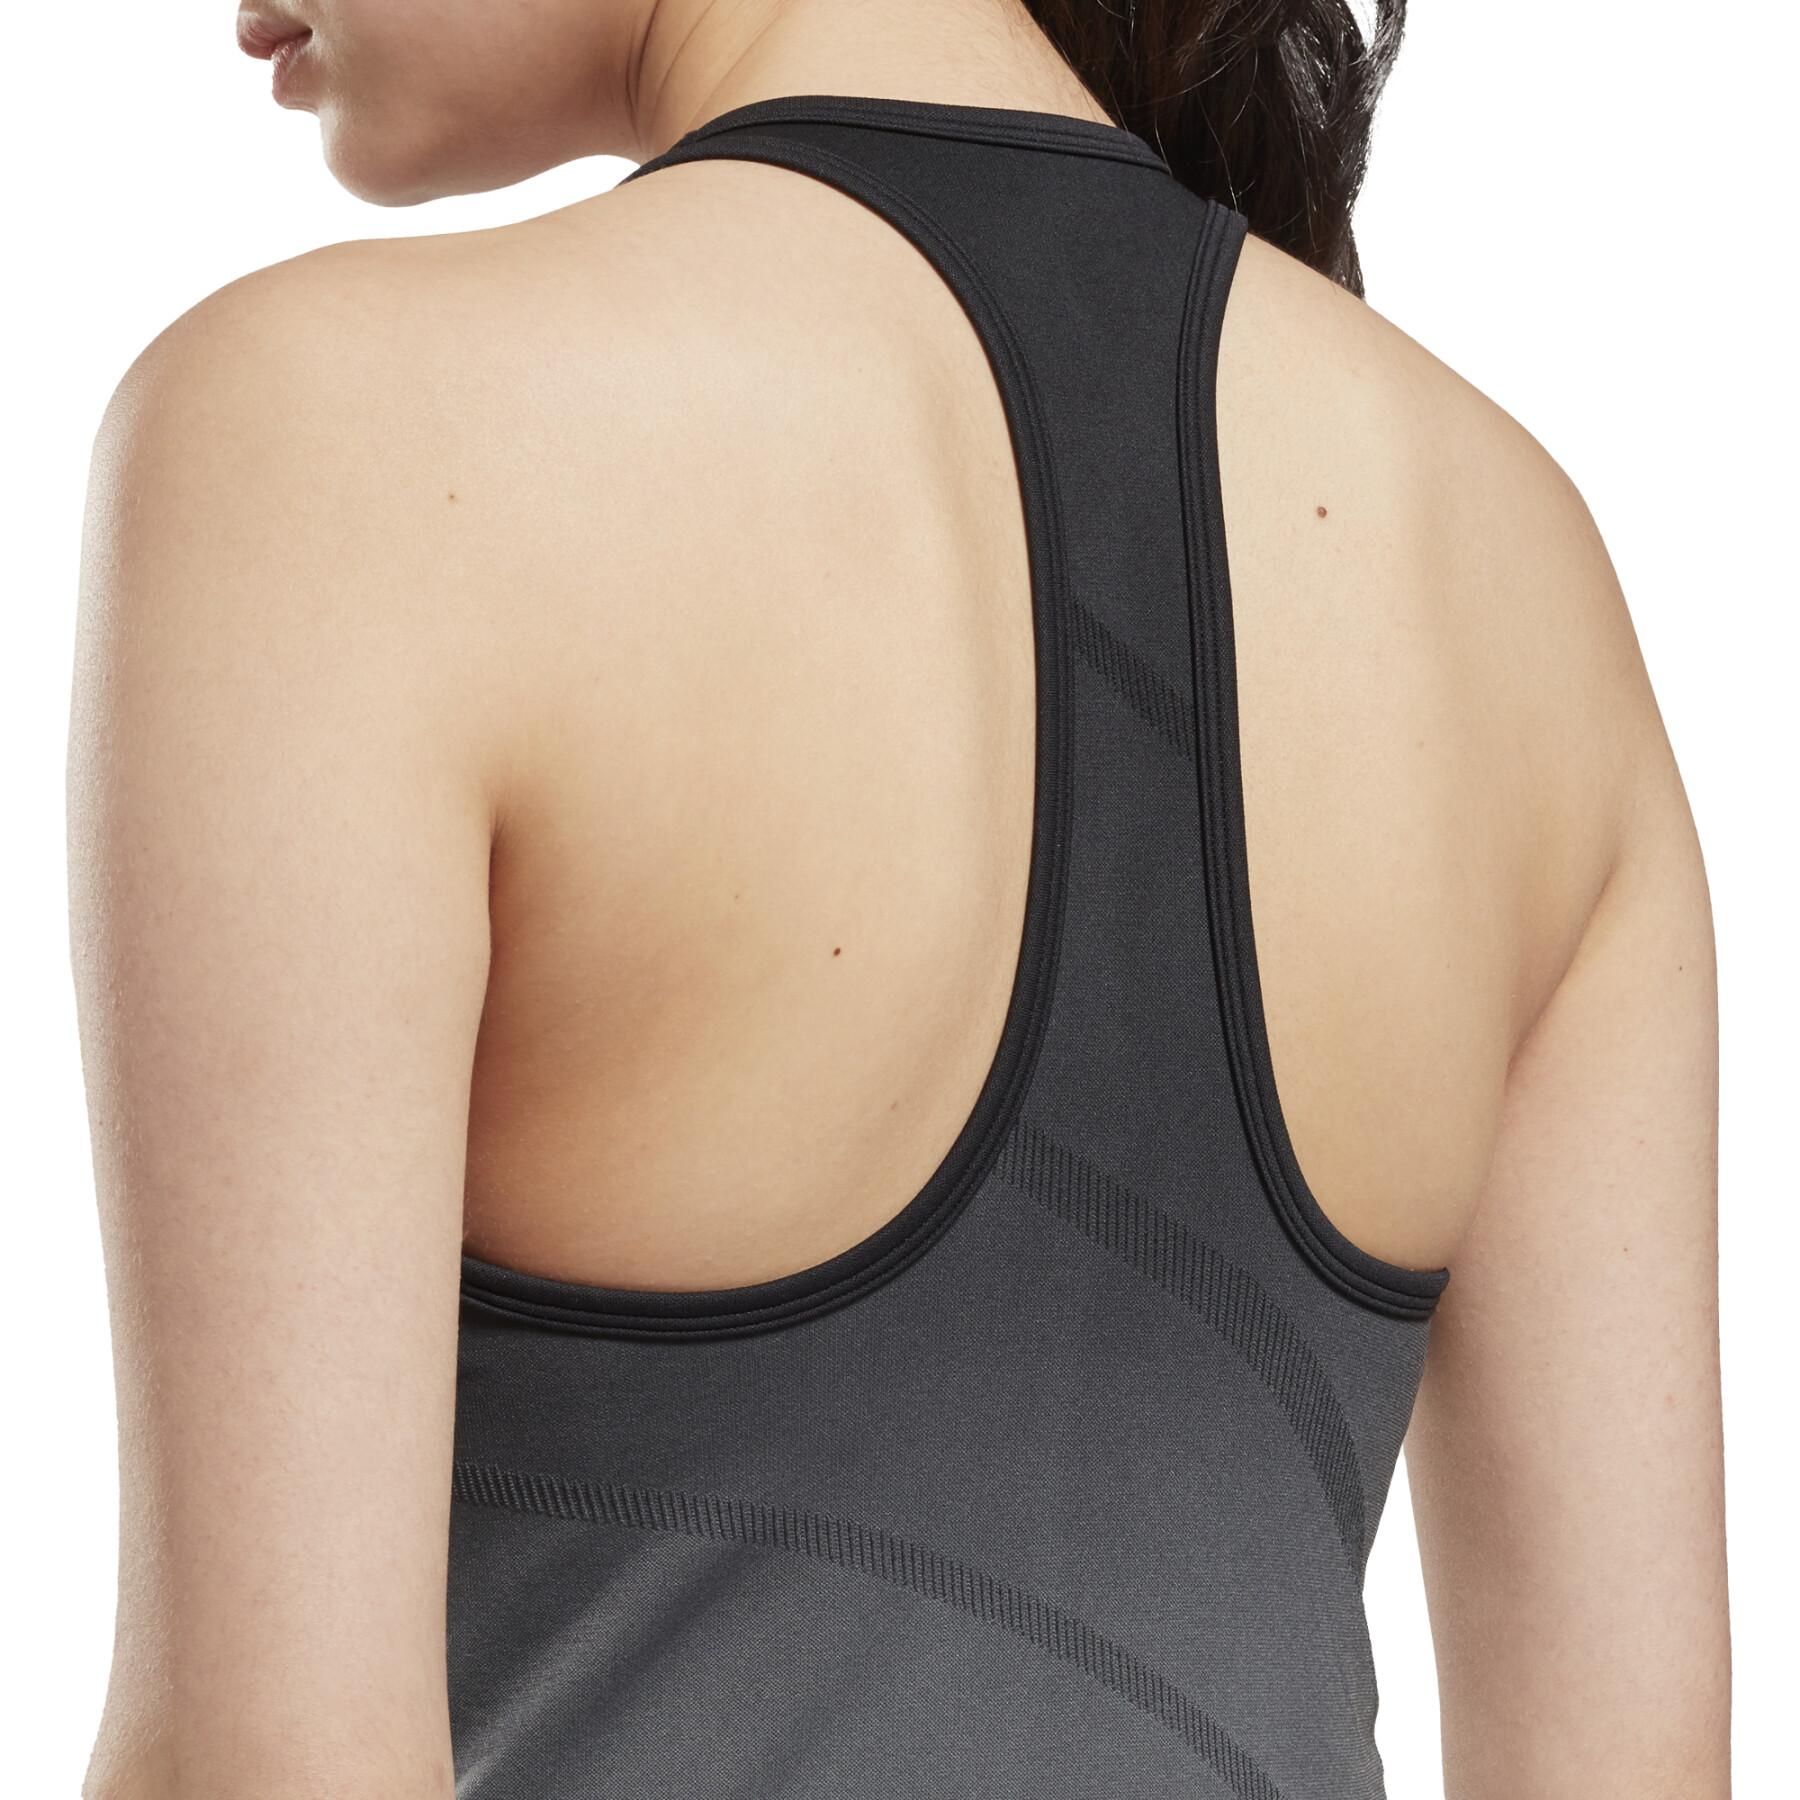 Damen-Tank-Top Reebok Sans Coutures United By Fitness